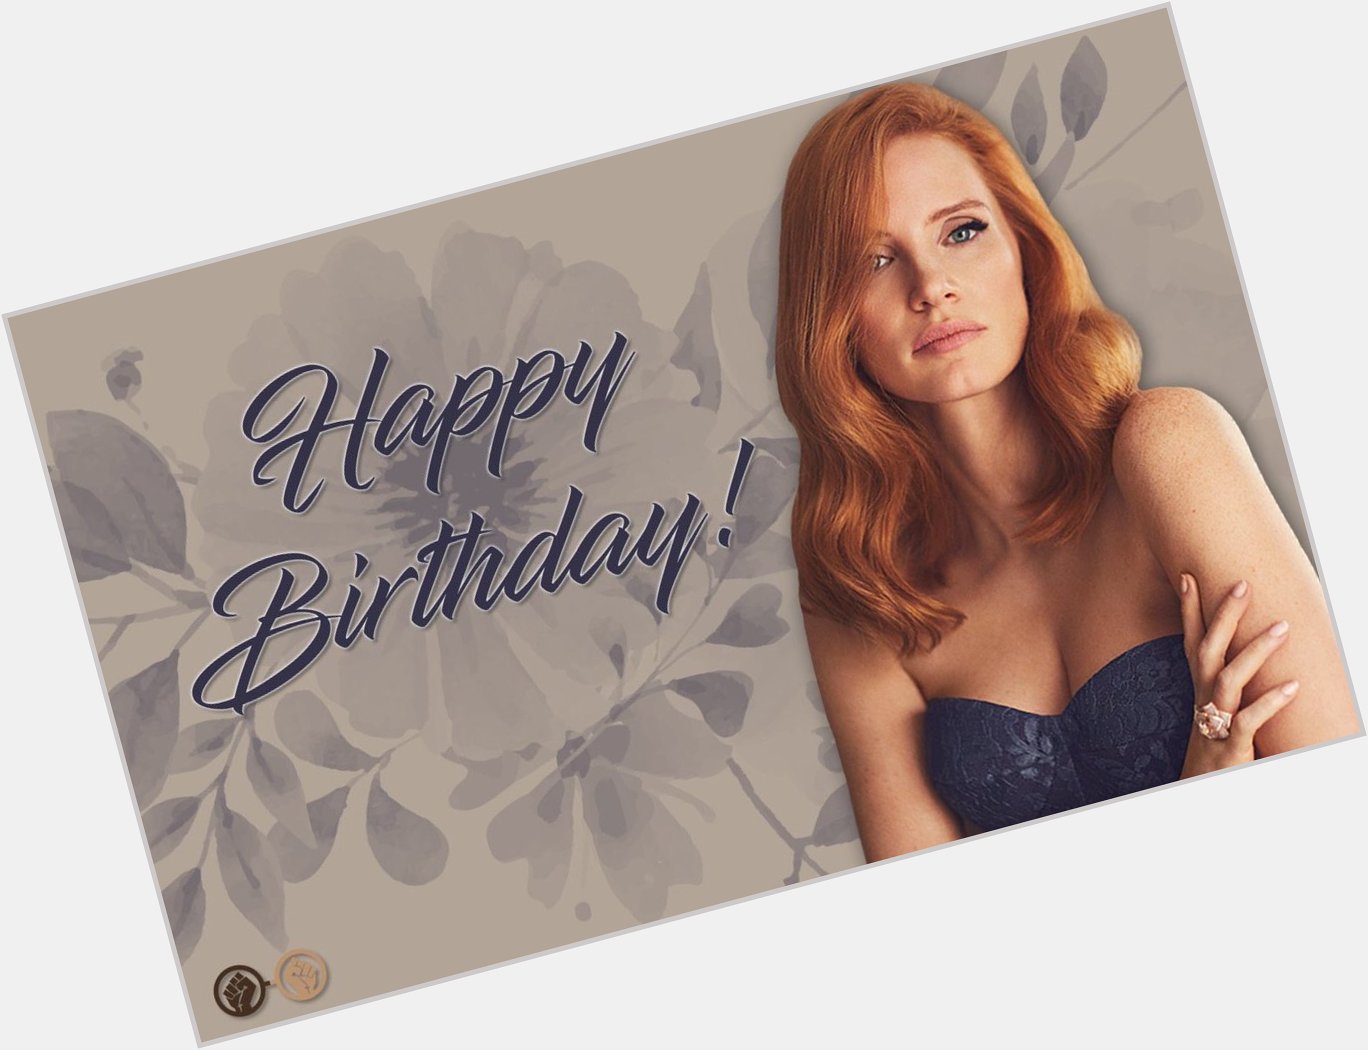 Happy birthday, Jessica Chastain! The talented actress turns 41 today. We wish her all the best! 